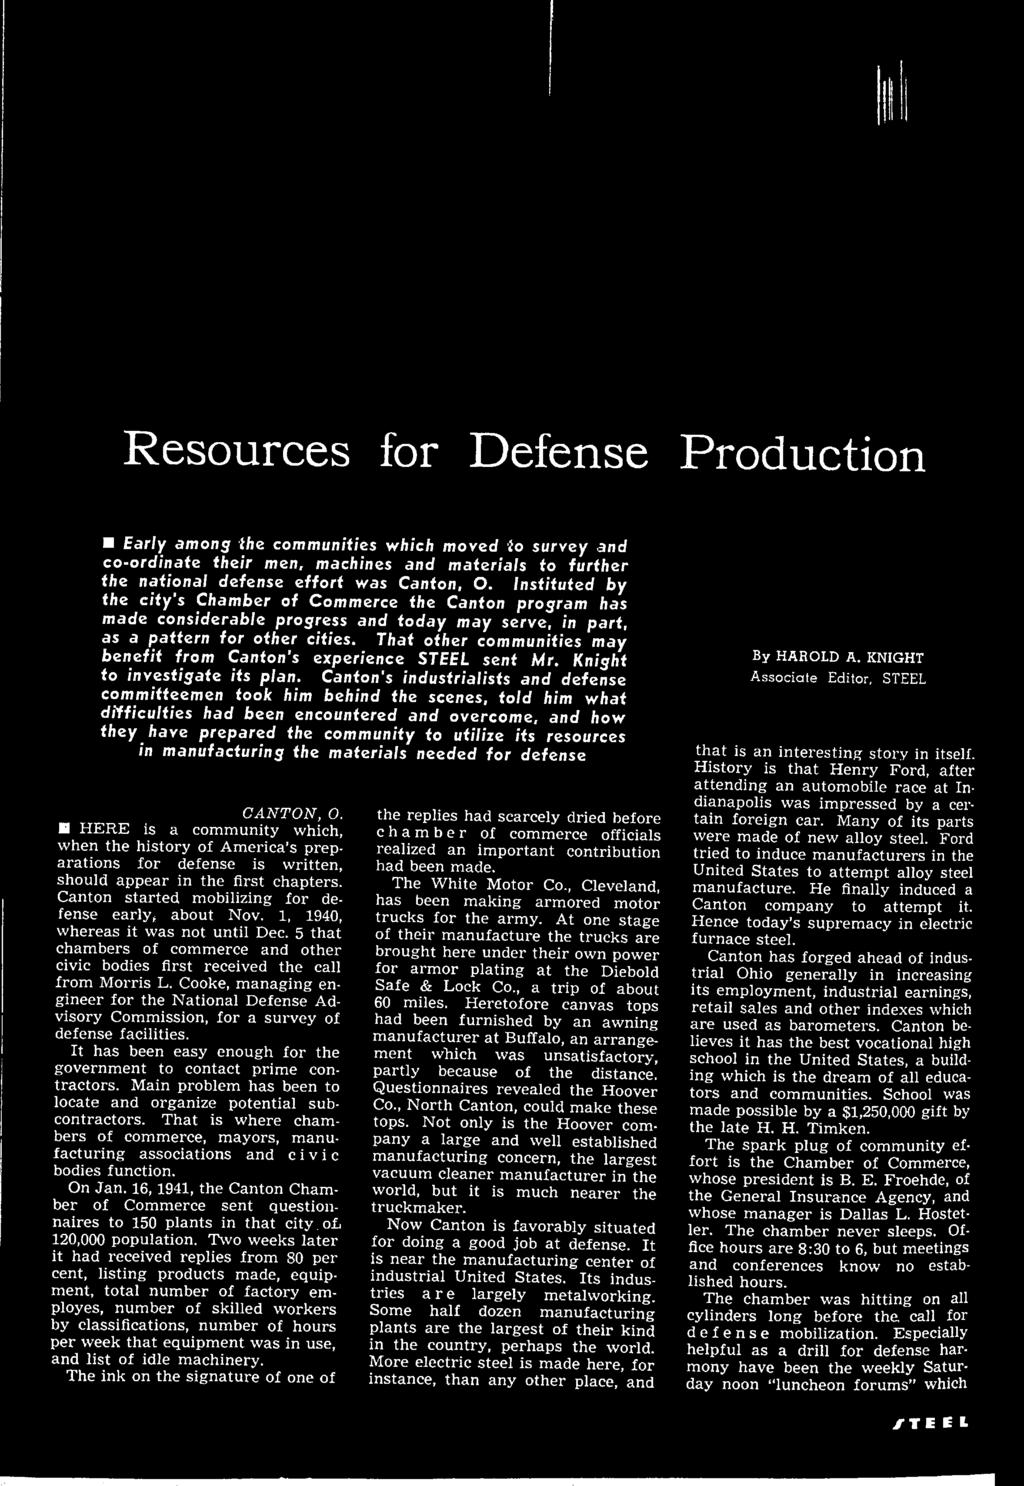 resources in manufacturing the materials needed for defense C A N T O N, O n H E R E is a c o m m u n i t y w h ic h w h e n t h e h i s t o r y o f A m e r i c a s p r e p a r a t i o n s f o r d e